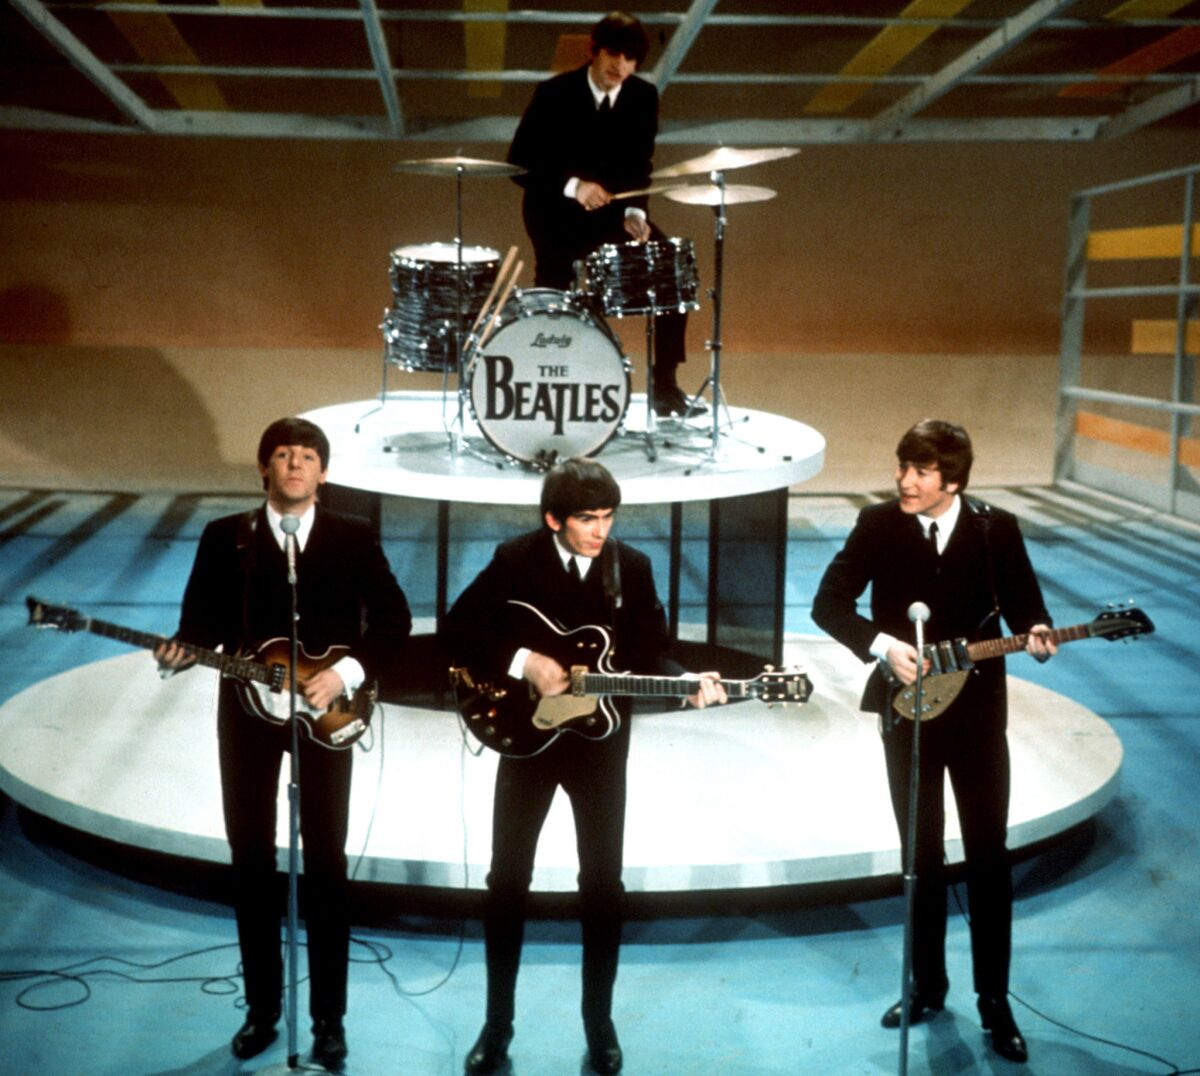 The Beatles, shown during their 1964 appearance on 'The Ed Sullivan Show,' were referenced in a federal judge's ruling on the National Security Agency's practice of gathering information from telecommunications providers.